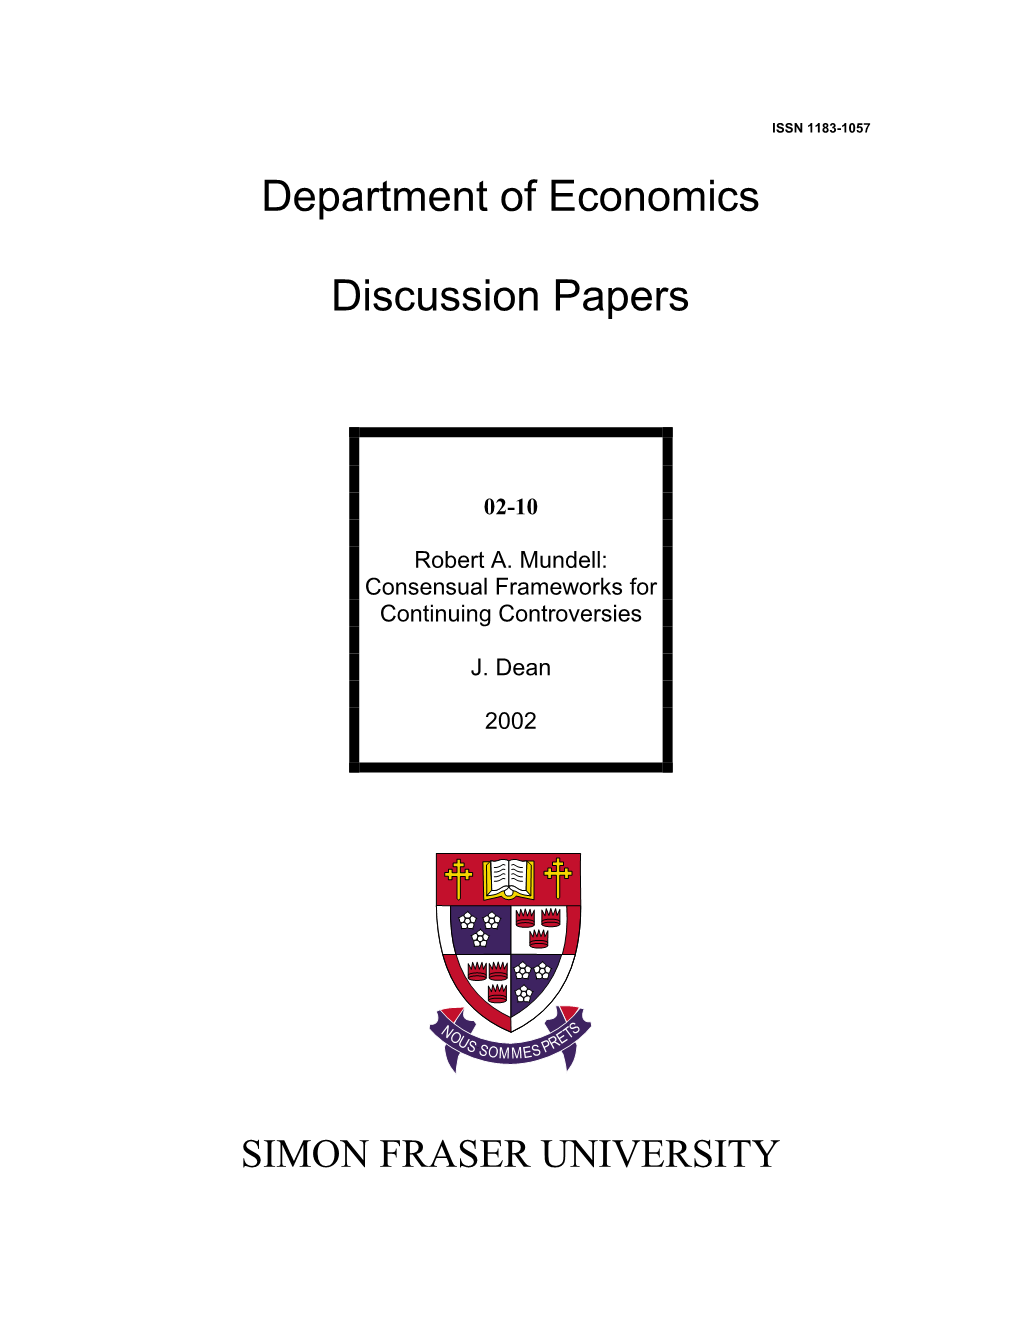 Department of Economics Discussion Papers